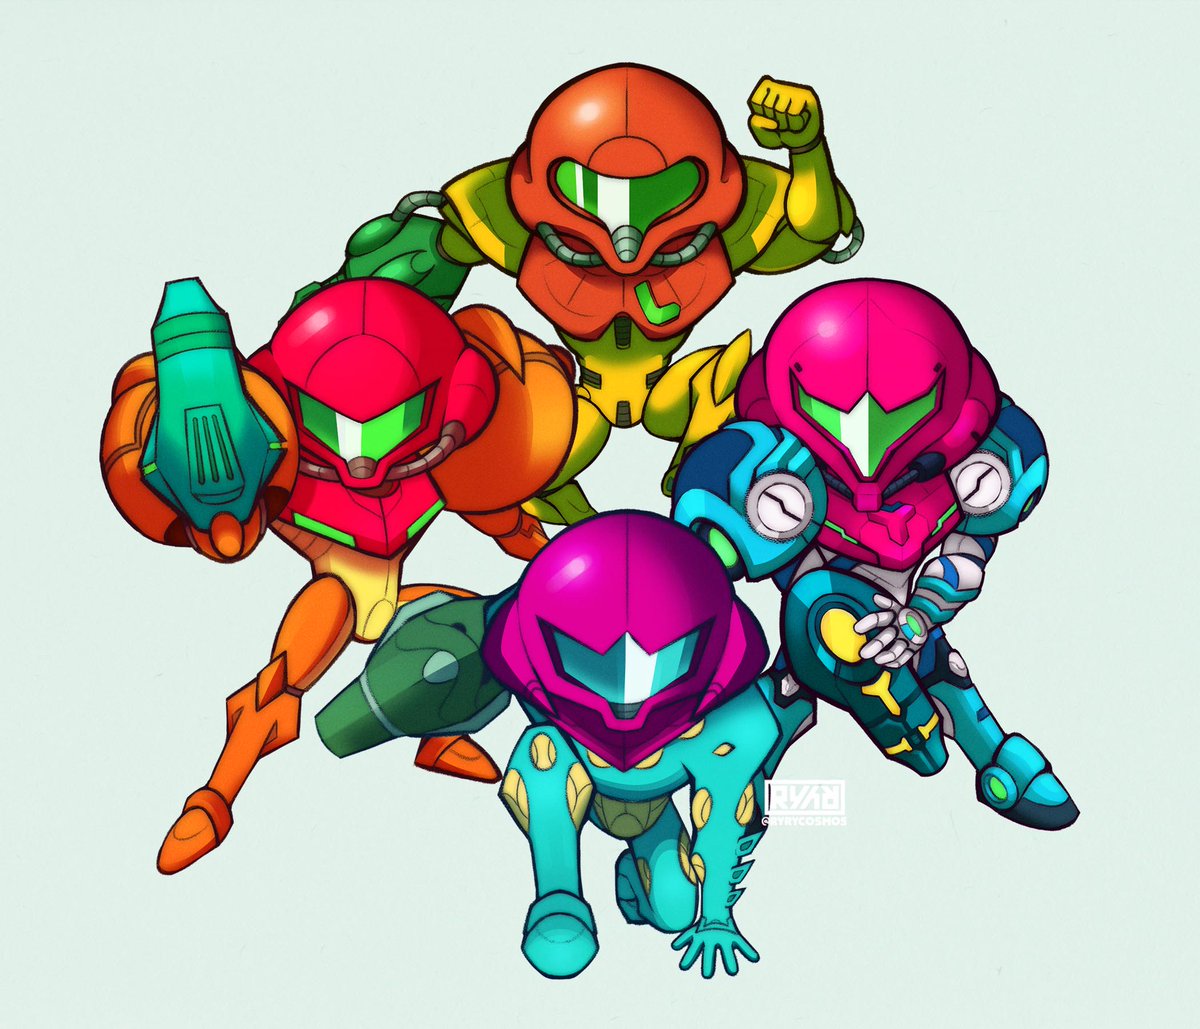 4girls arm_blade arm_cannon arm_support assault_visor commentary english_commentary full_body fusion_suit helmet kneeling looking_at_viewer metroid metroid_(classic) metroid_dread metroid_fusion multiple_girls multiple_persona power_suit power_suit_(metroid) raised_fist ryrycosmos samus_aran simple_background super_metroid varia_suit weapon